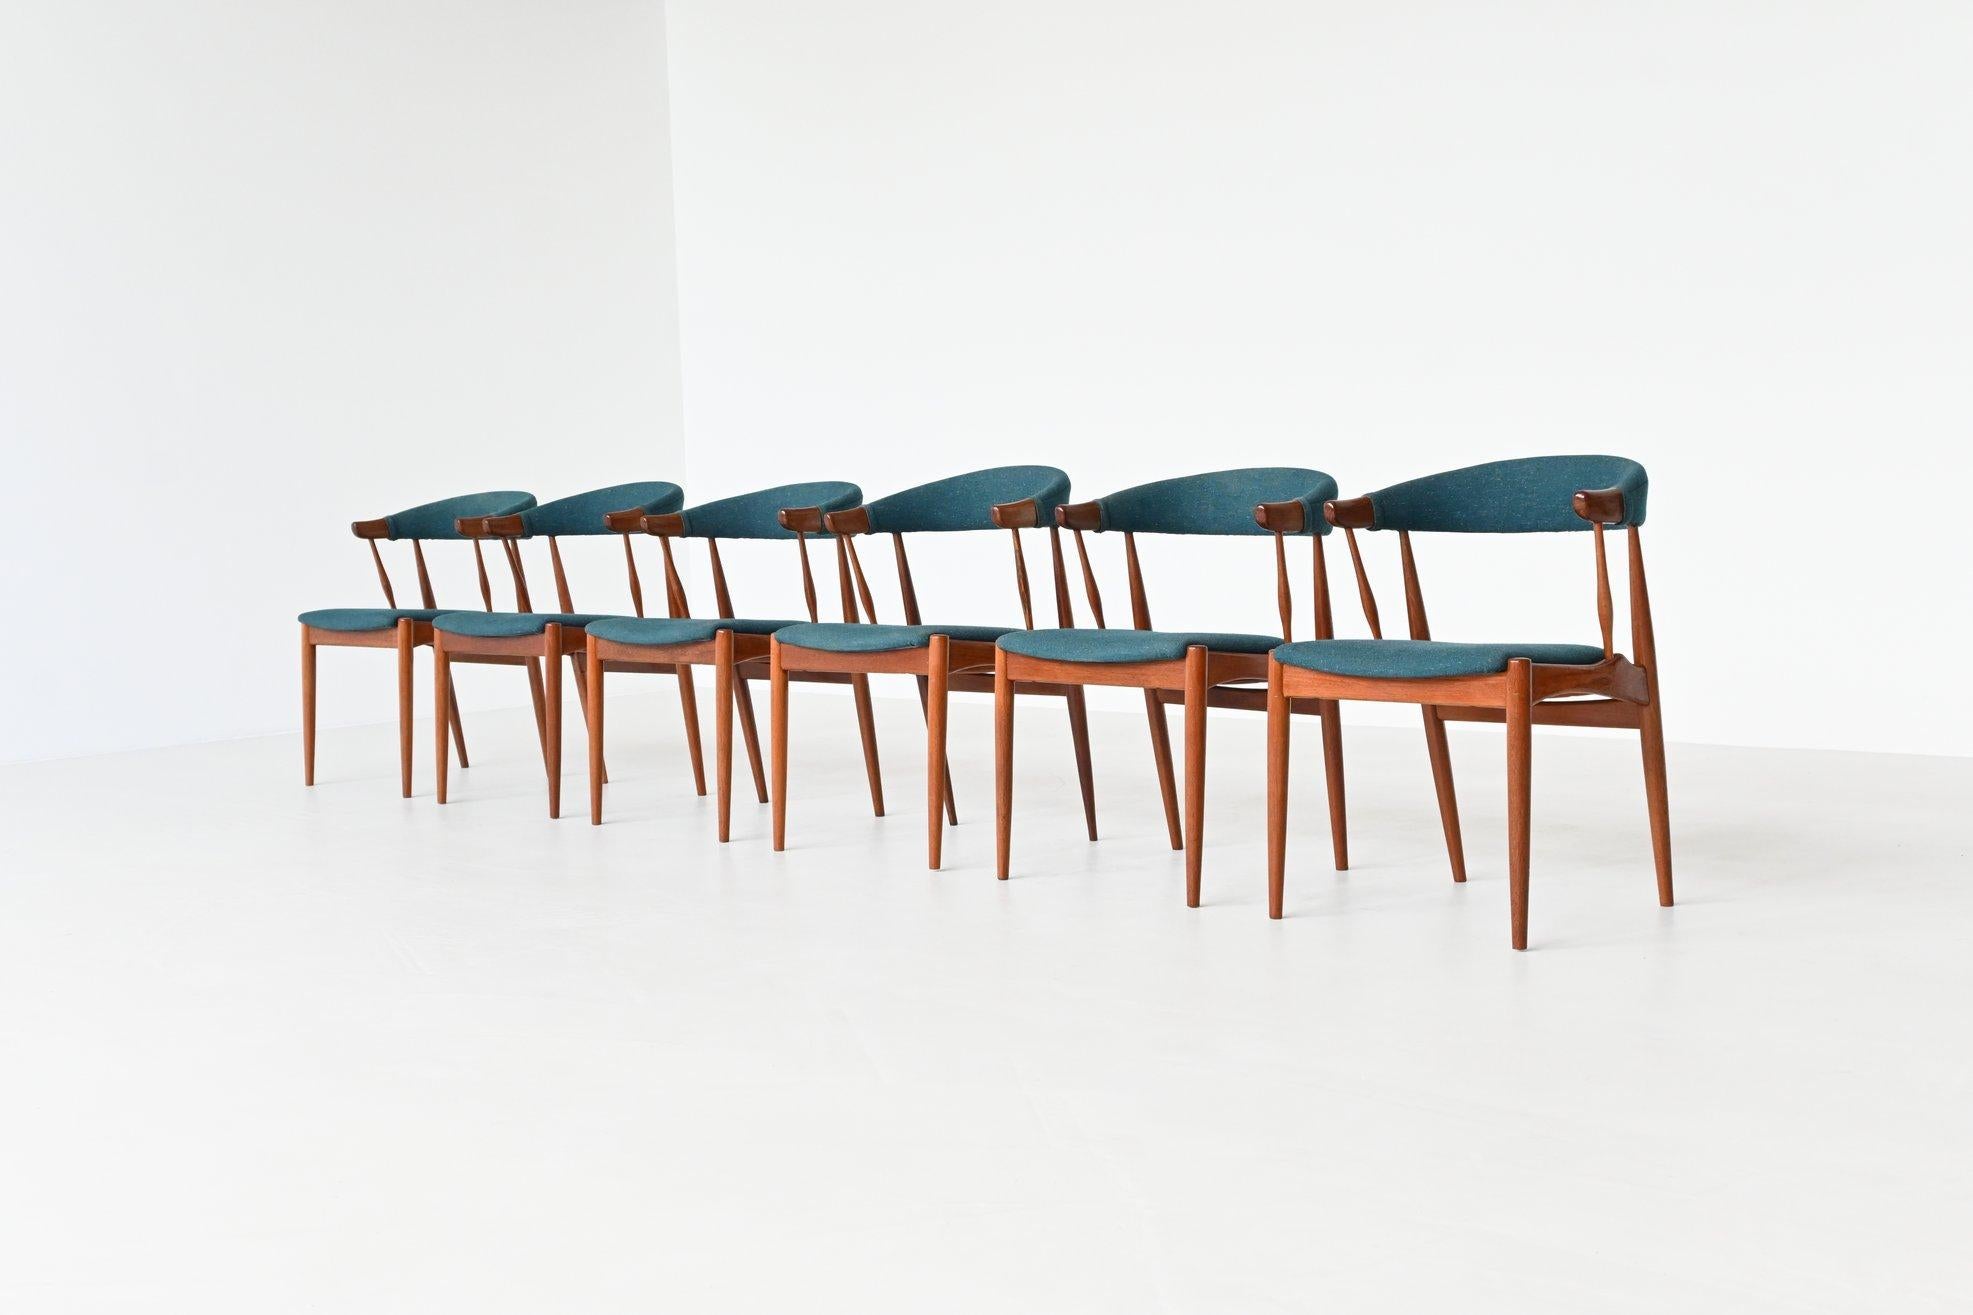 Stunning set of six dining chairs model BA113 designed by Johannes Andersen and manufactured by Brdr. Andersens Møbelfabrik A/S, Denmark 1969. The chairs feature a striking sculptural design and solid teak construction. They are upholstered with